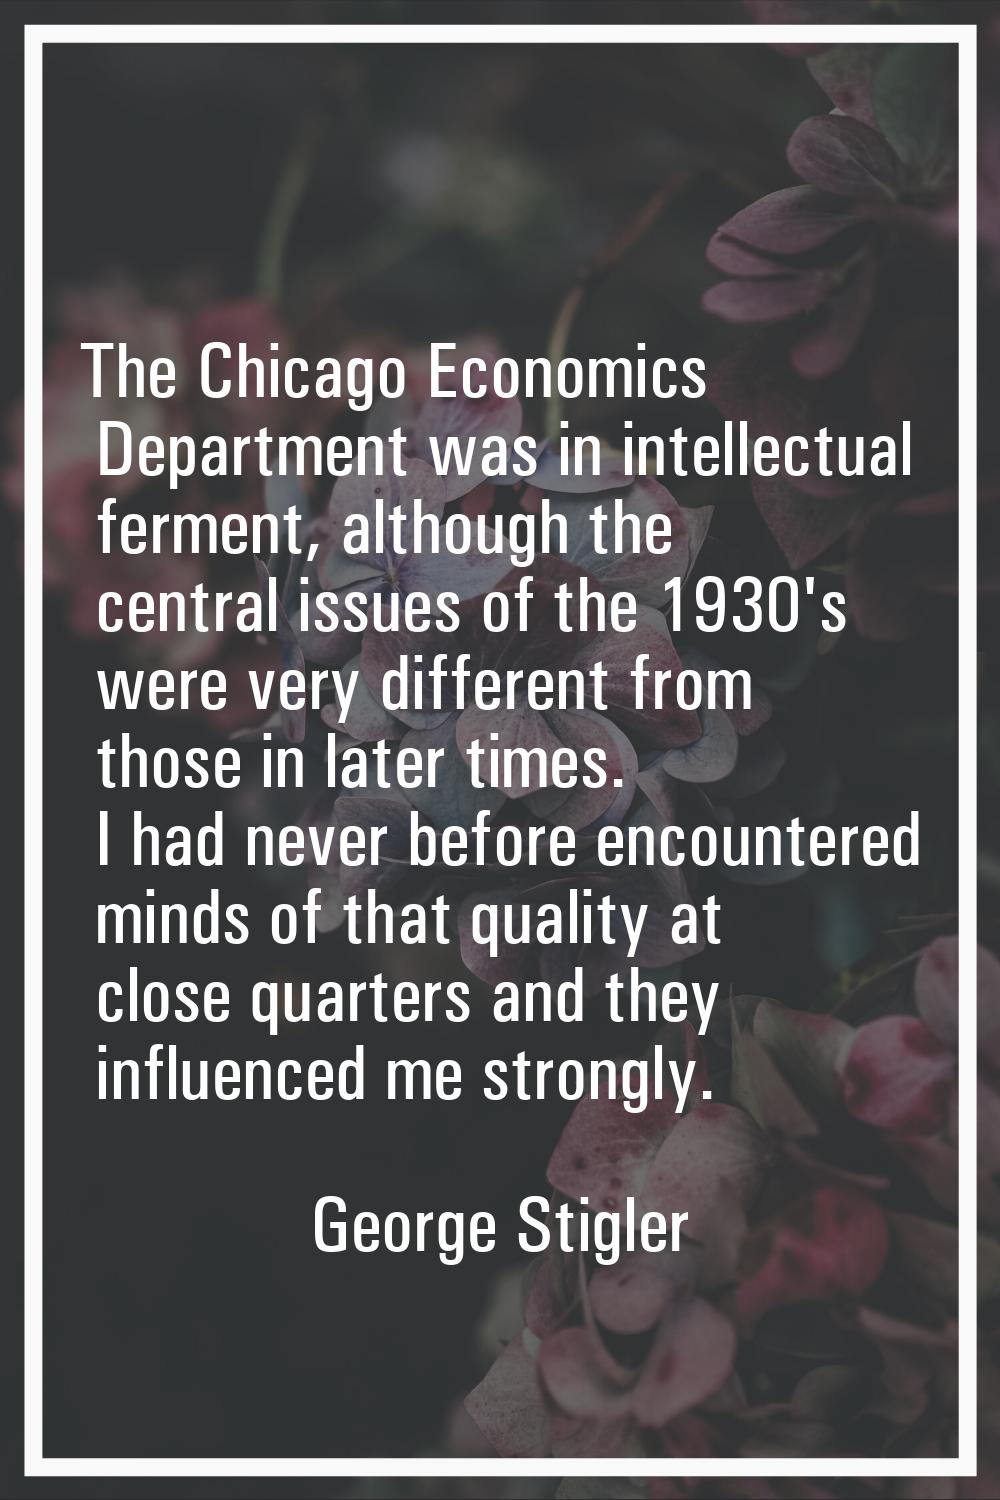 The Chicago Economics Department was in intellectual ferment, although the central issues of the 19